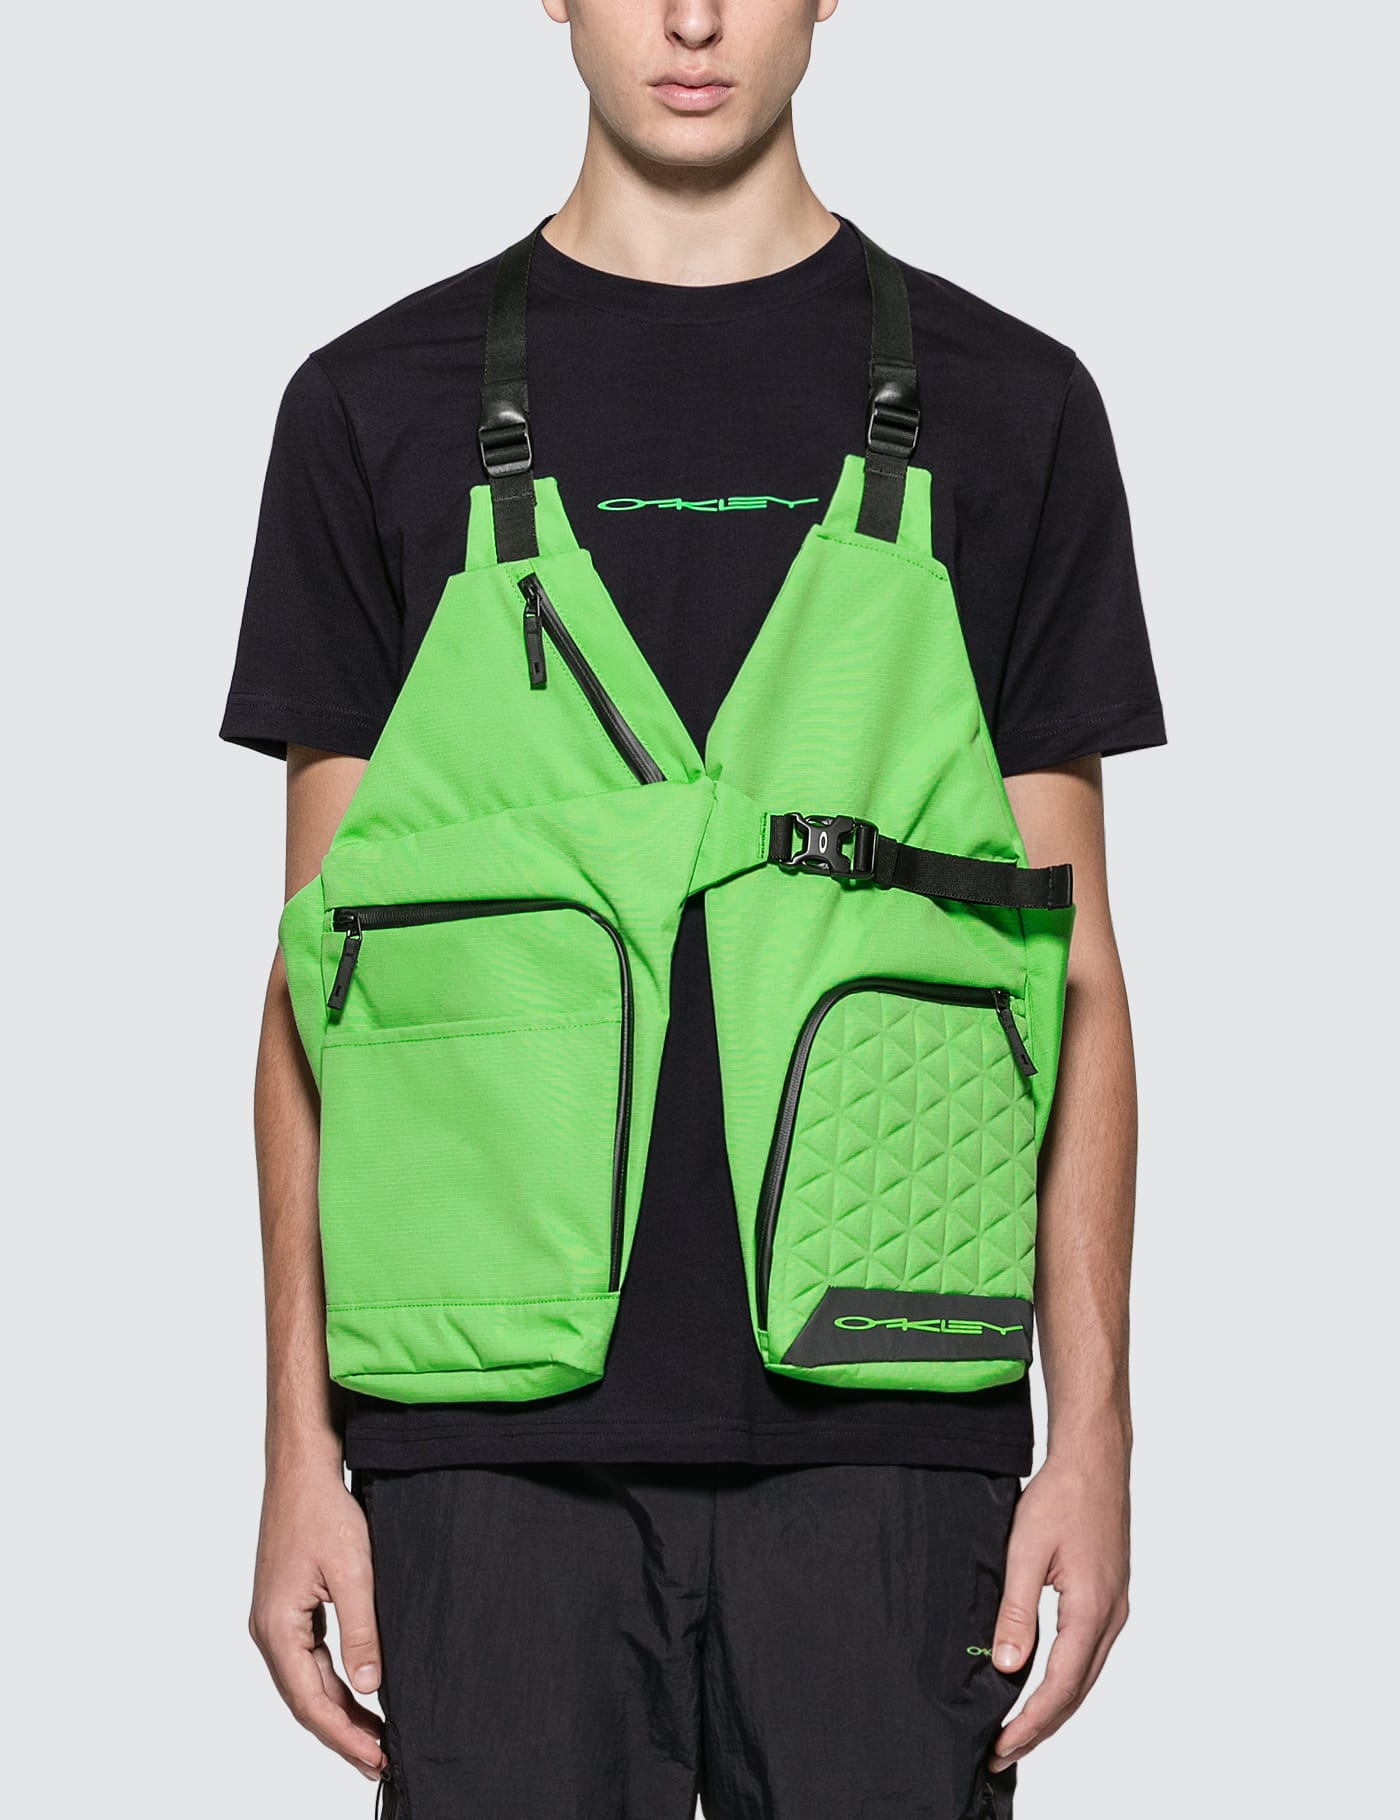 Oakley - Body Bag Vest Bag | HBX - Globally Curated Fashion and